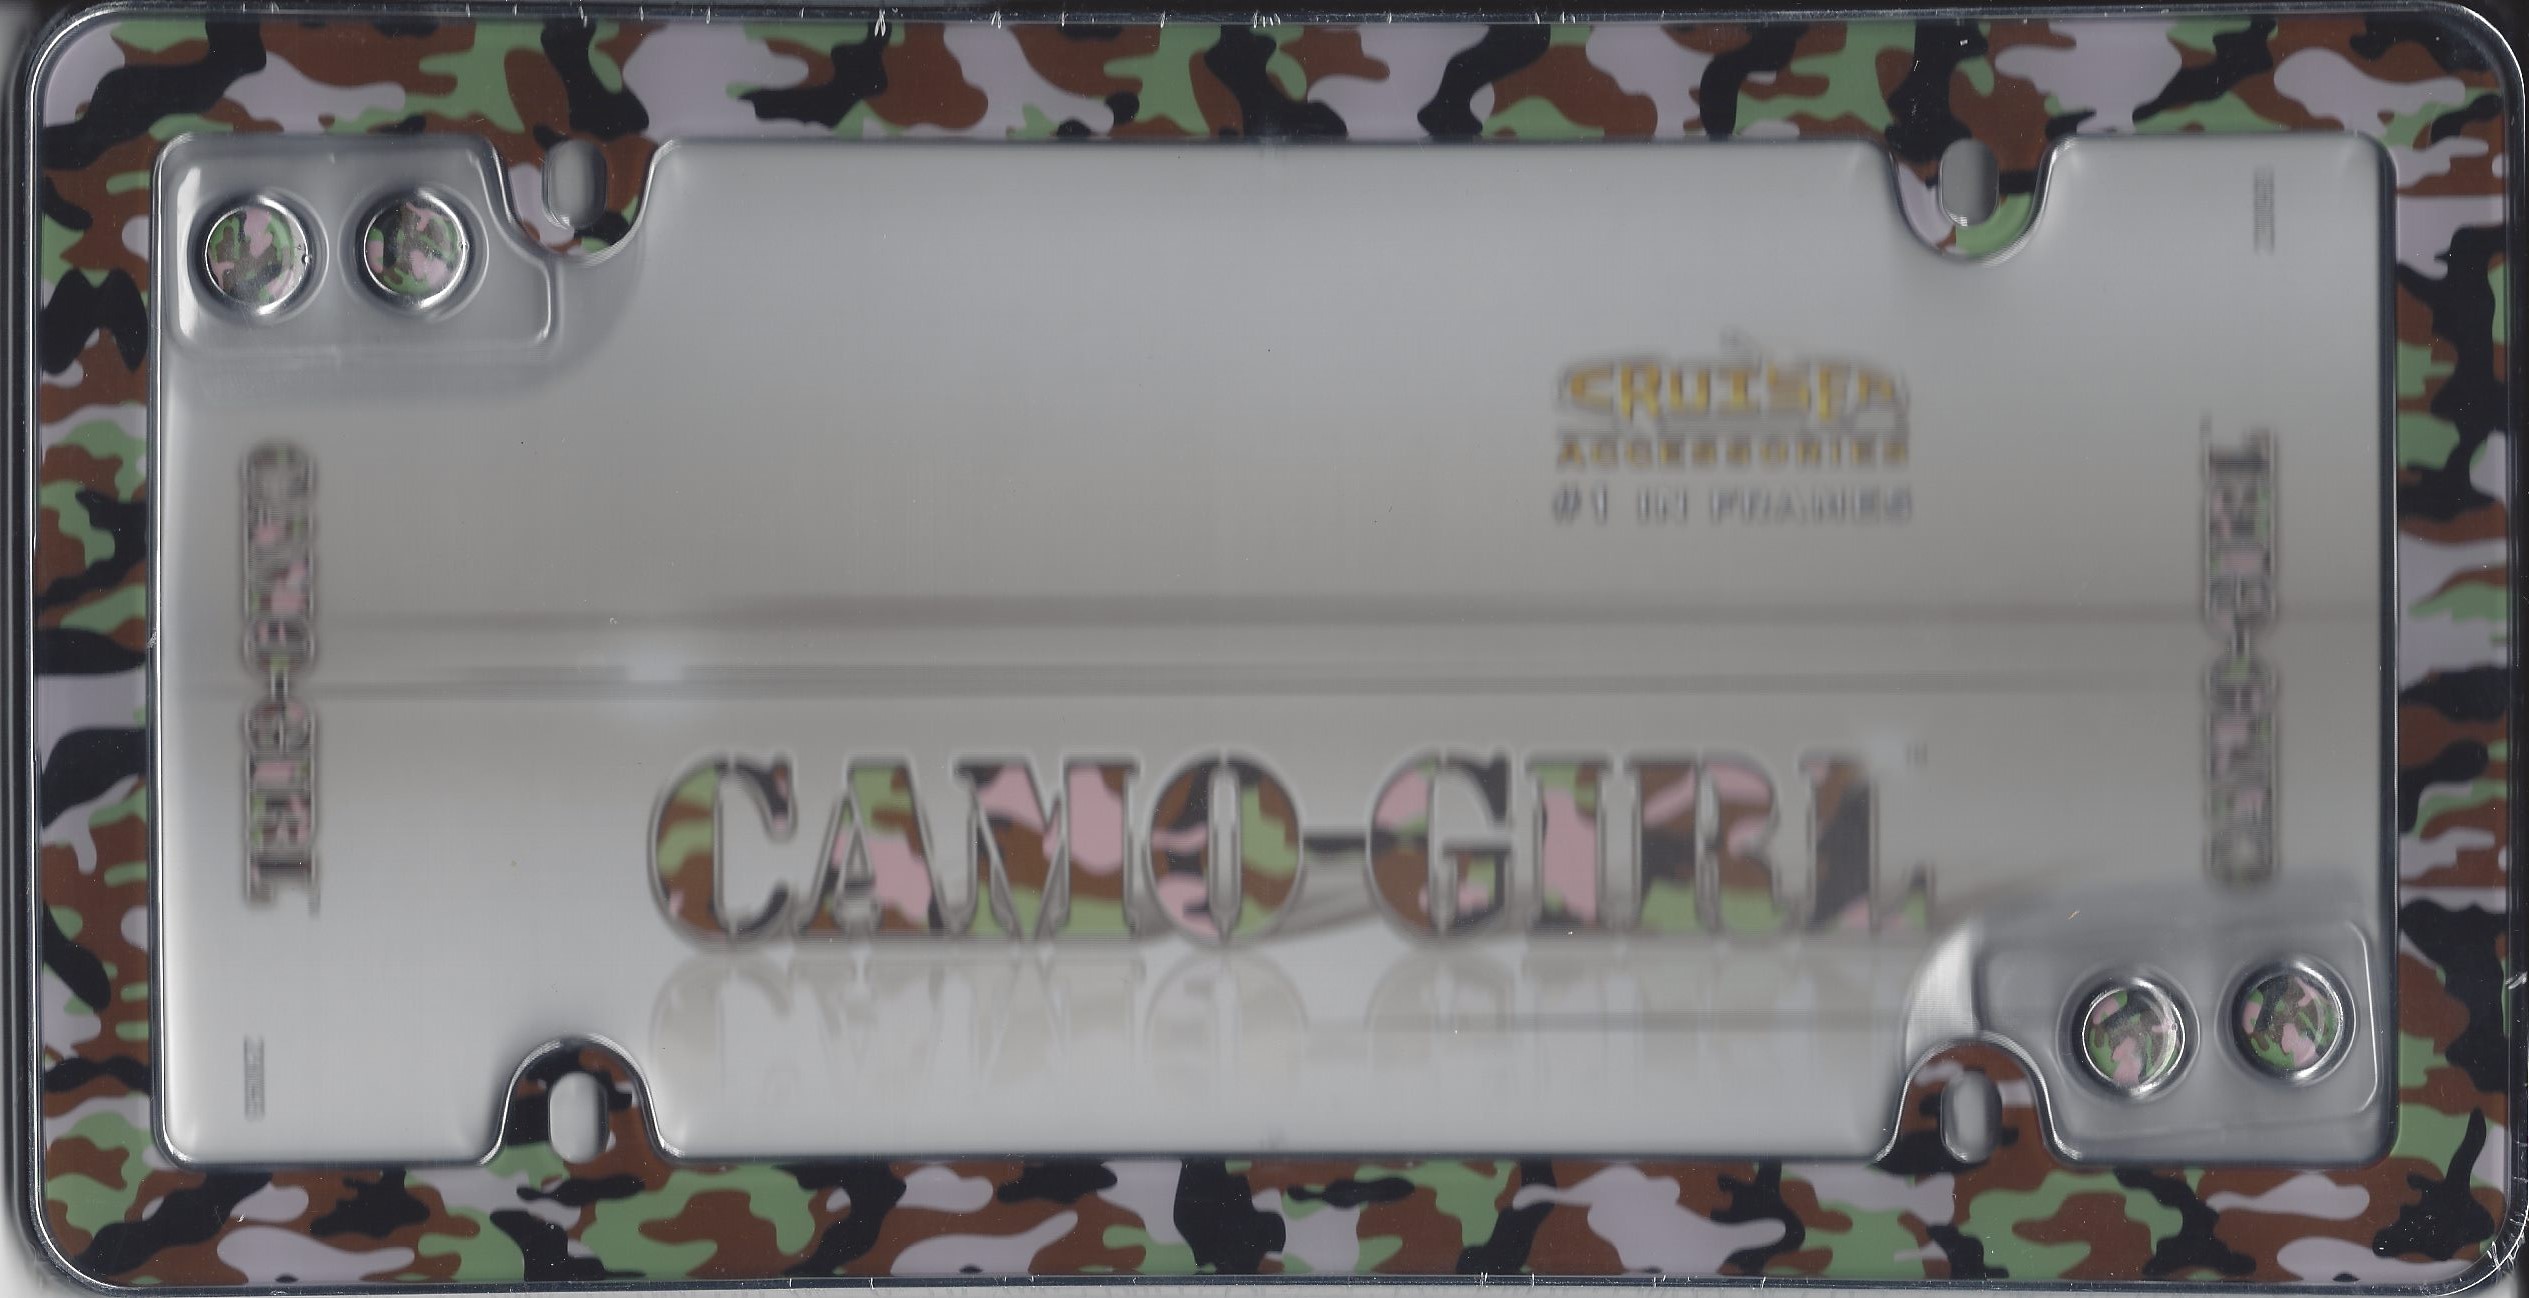 Pink Camo Girl Plastic License Plate Frame  Free Screw CAPS with this Frame